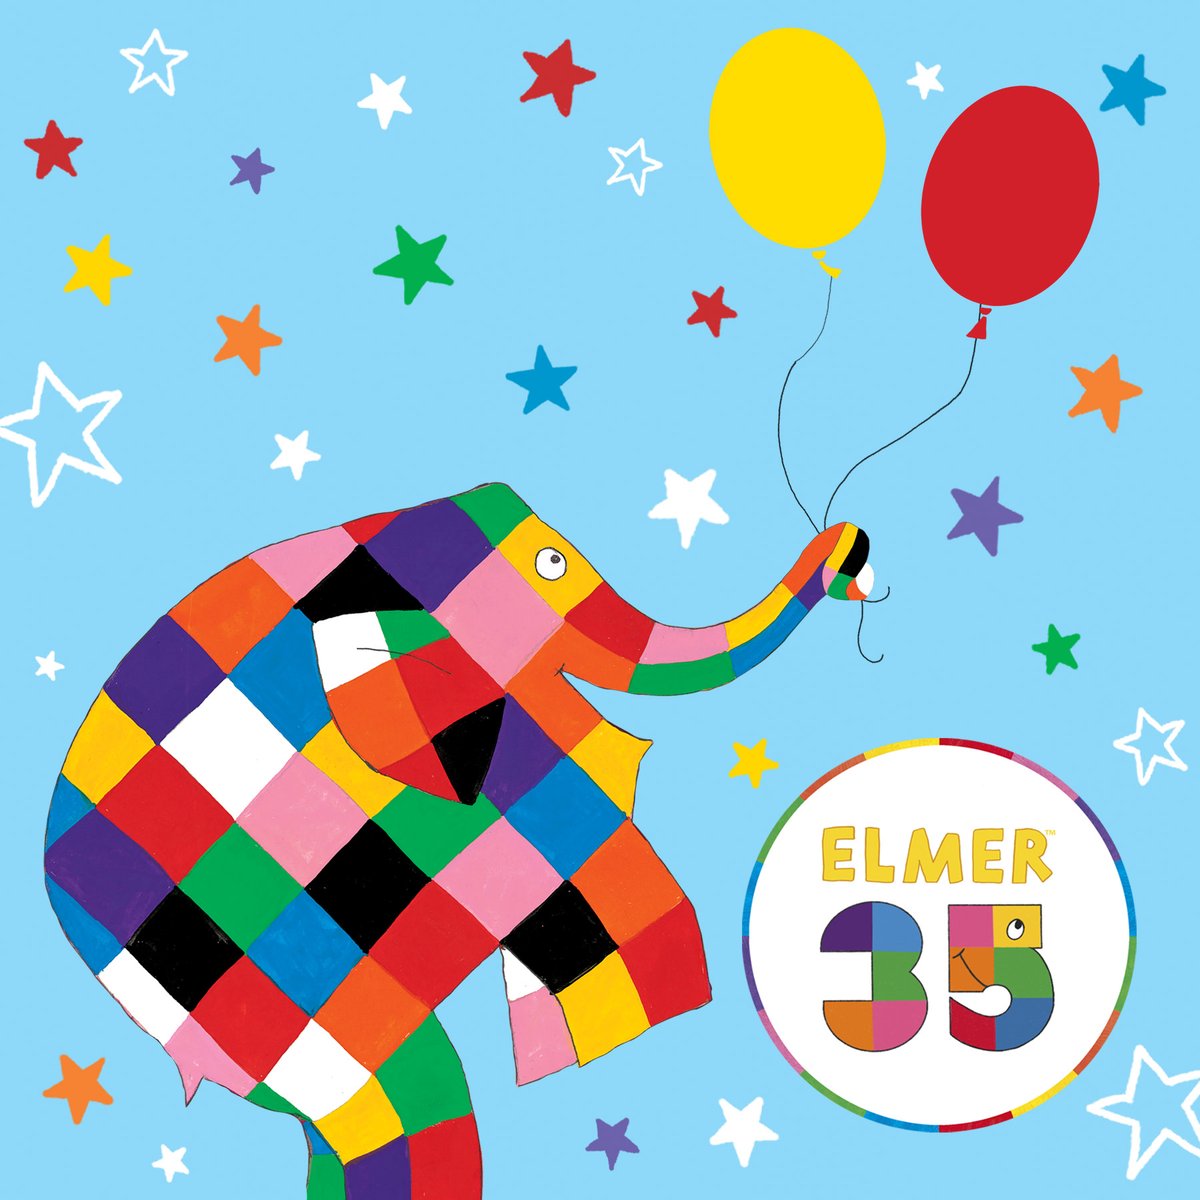 Calling all Elmer fans! 🌈🐘 It’s #ElmerDay on Saturday 25th May and this year will be an extra special celebration for Elmer’s 35th birthday! 🌈🐘 Find an event near you: elmer.co.uk/map/